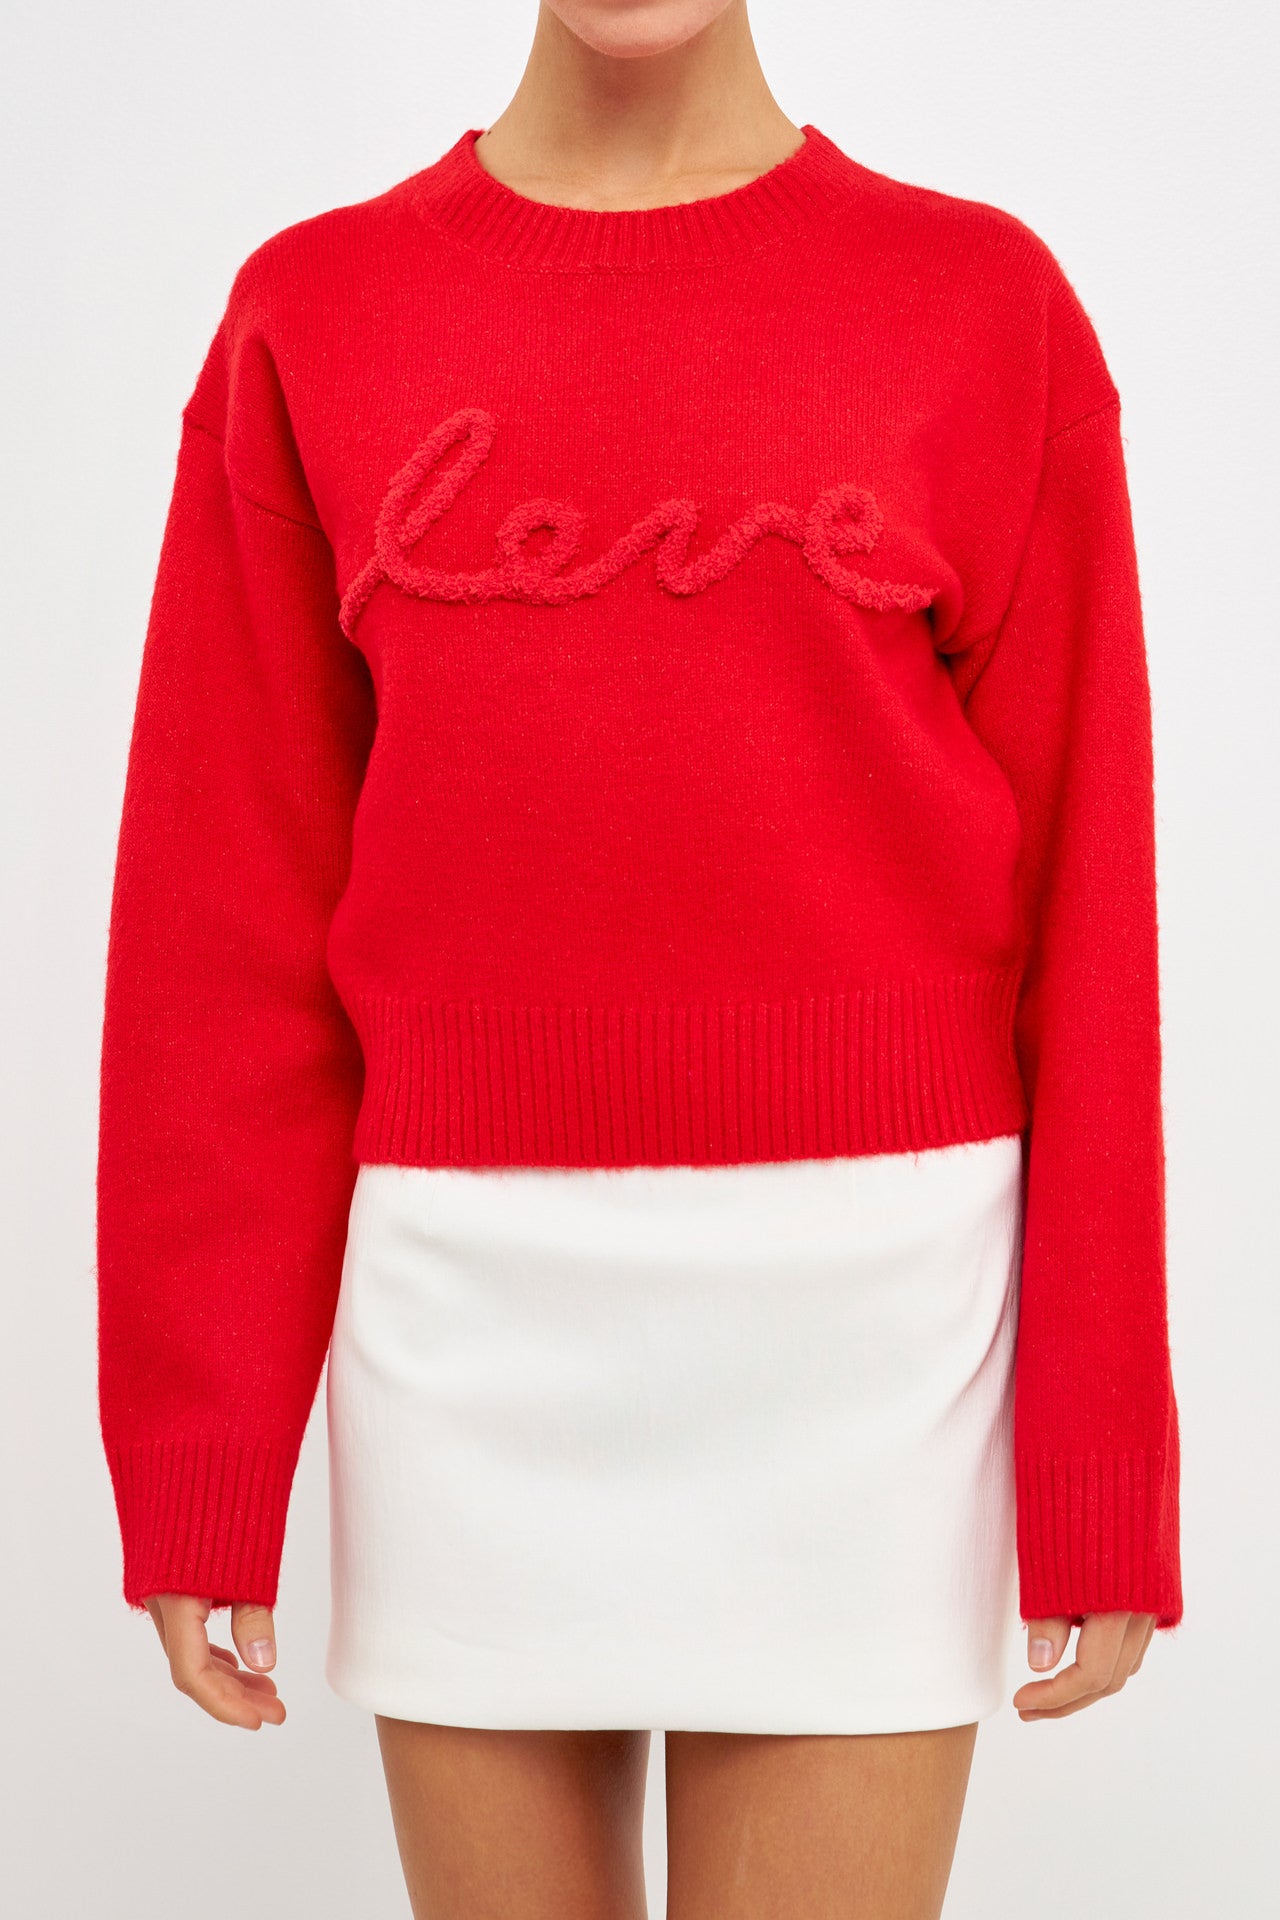 ENDLESS ROSE - Crewneck Love Sweater - SWEATERS & KNITS available at Objectrare